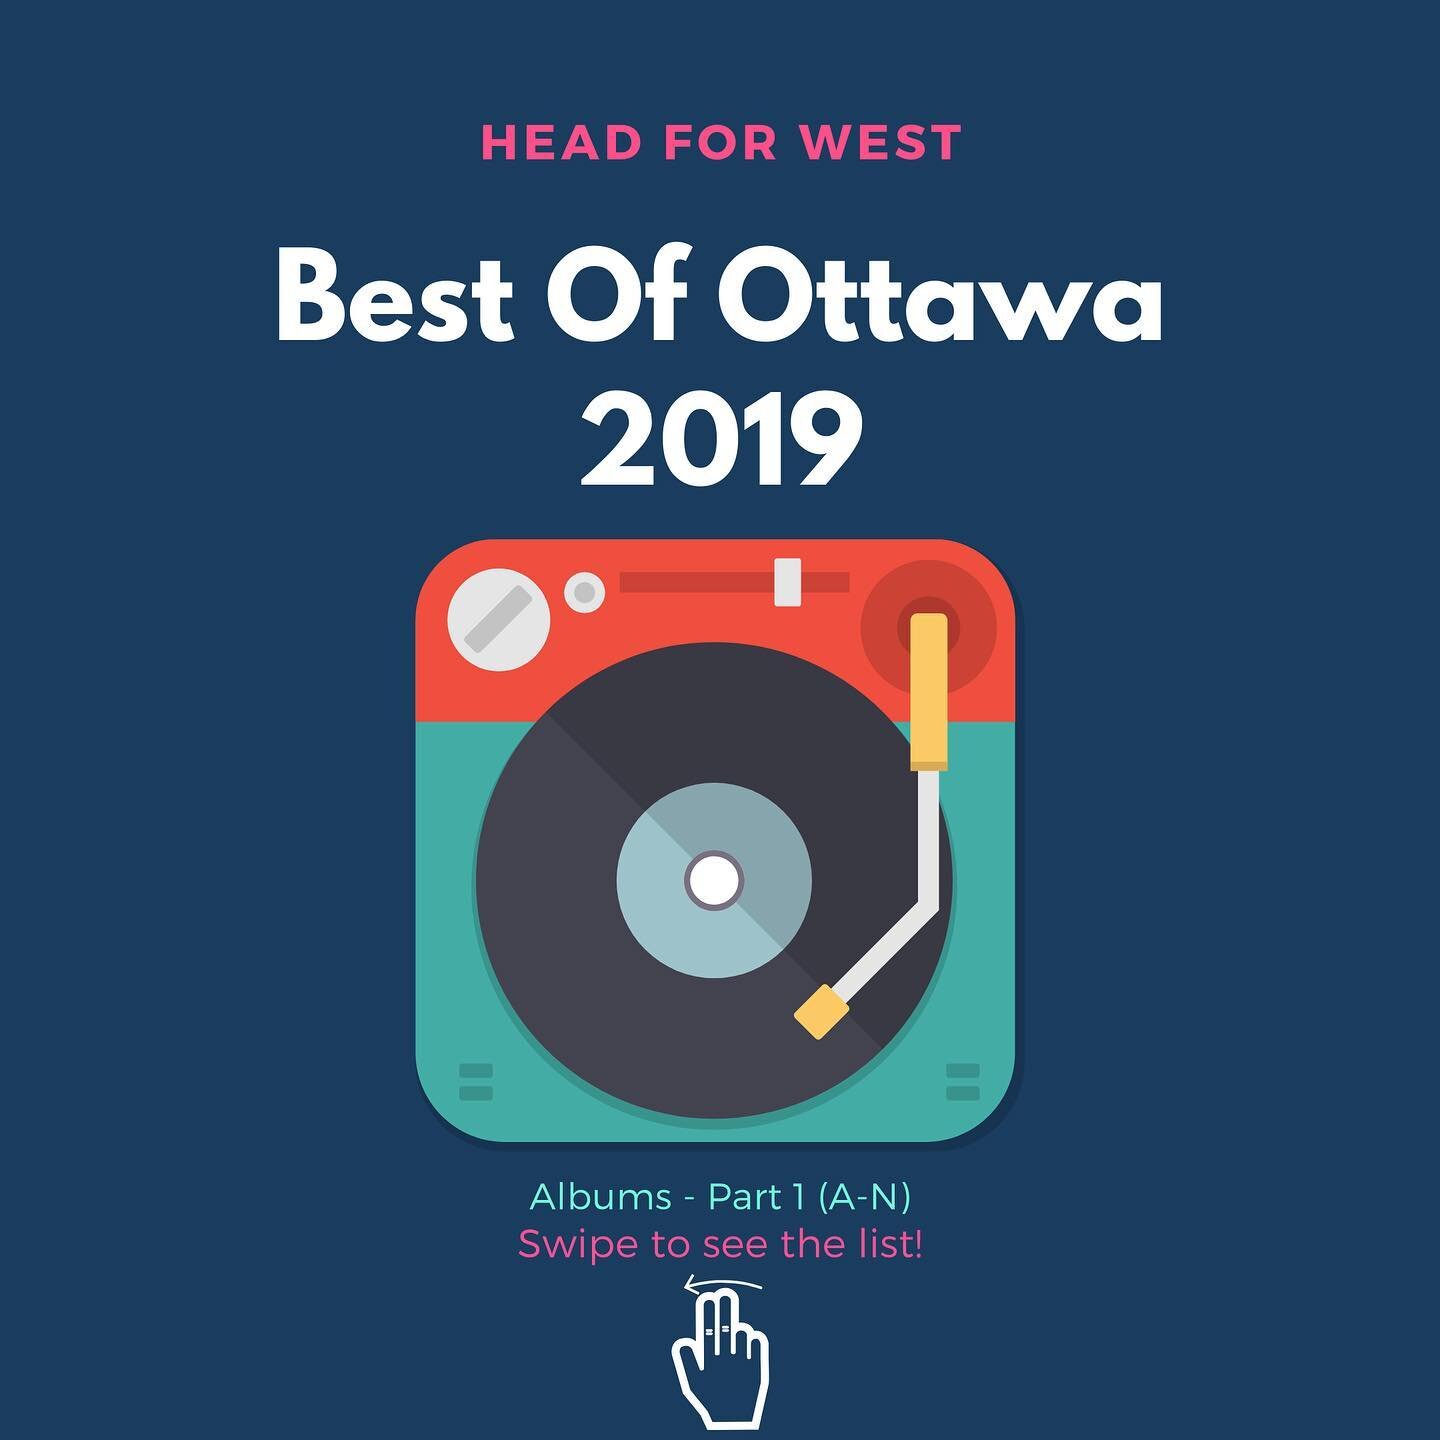 Our Best Of Ottawa 2019 series continues! Here is the first half of the picks for best local album of 2019. Swipe to see the list, and check out our blog for more. Link in bio! #ottawa #ottmusic #YOW #Ottawamusic #ott #bestof #bestof2019 #localmusic 